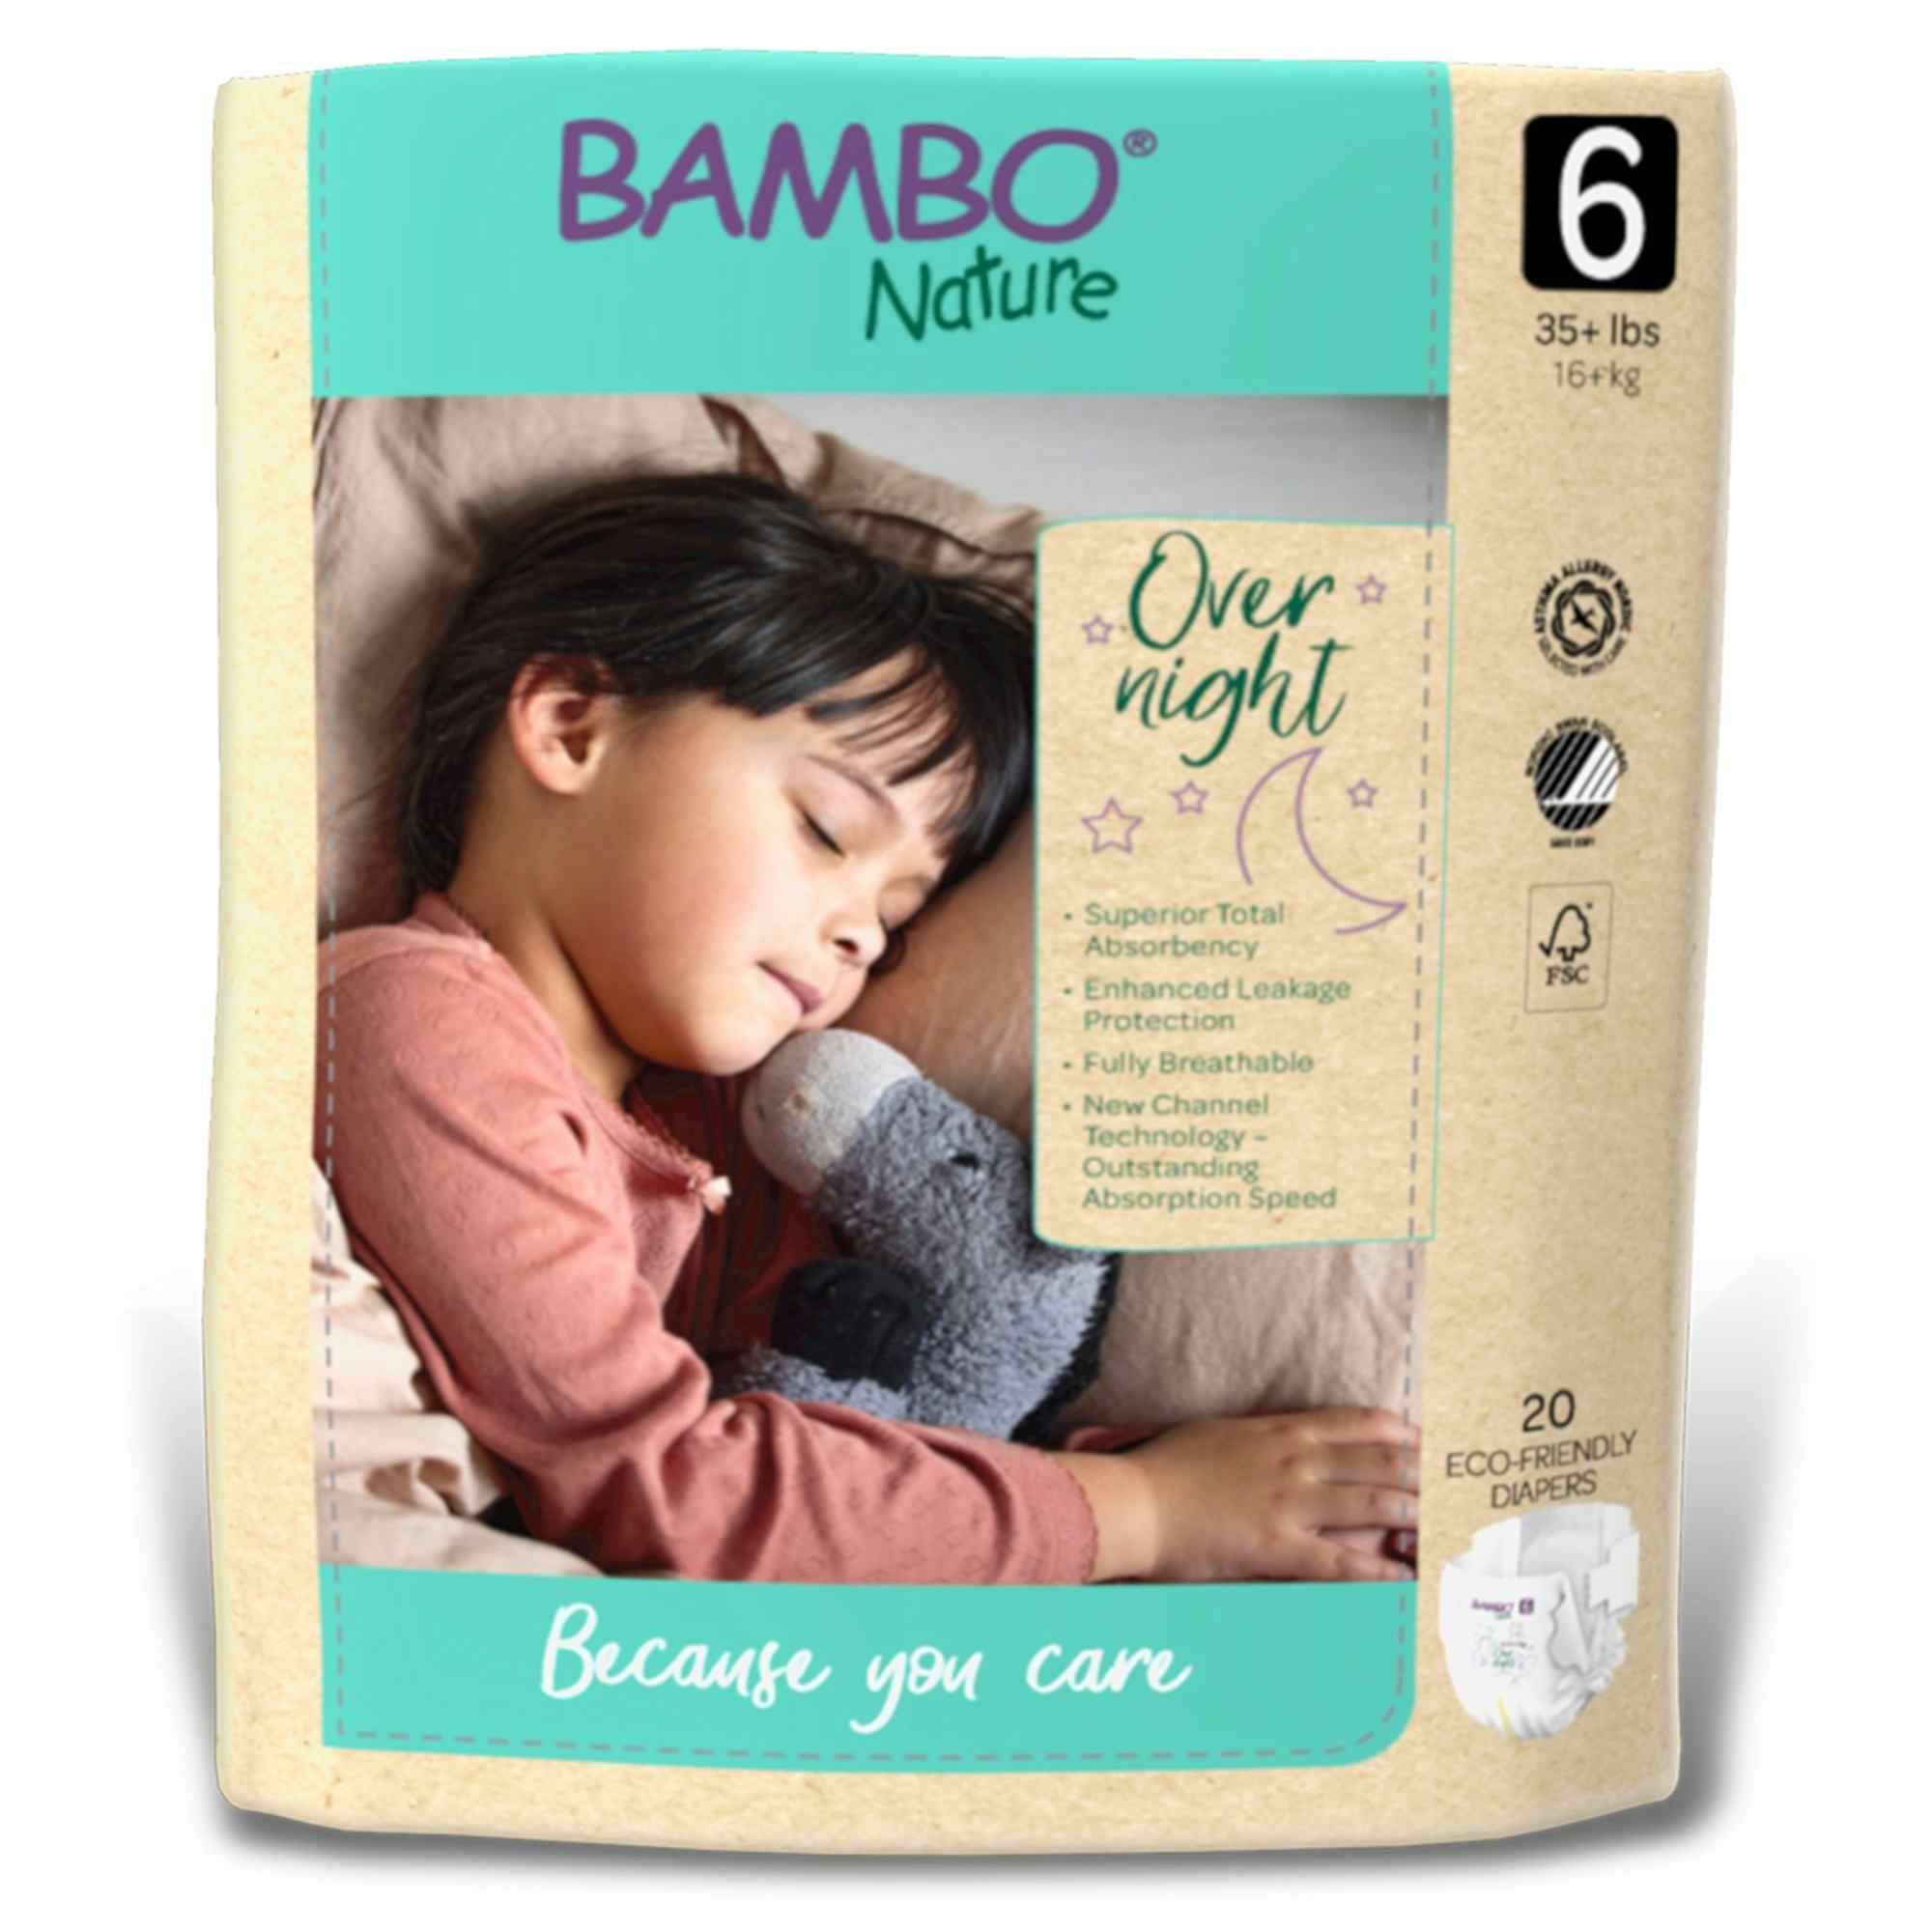 Bambo Nature Overnight Baby Diapers with Tabs, Heavy Absorbency, 1000021012, Size 6 (35 lbs. and Up) - Case of 80